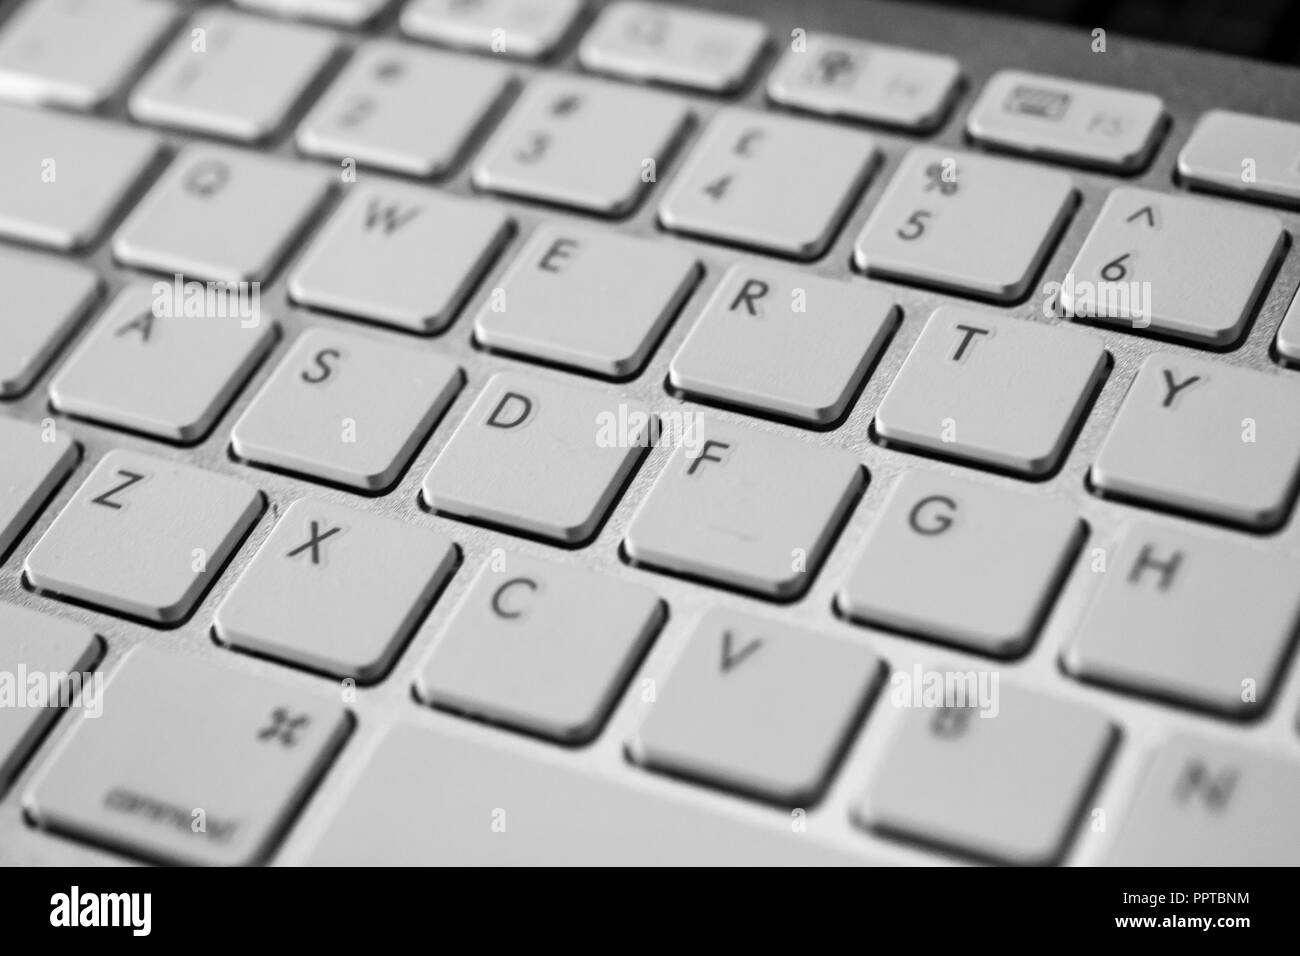 cloesup of a qwerty computer keyboard in white with black numbers and letters Stock Photo